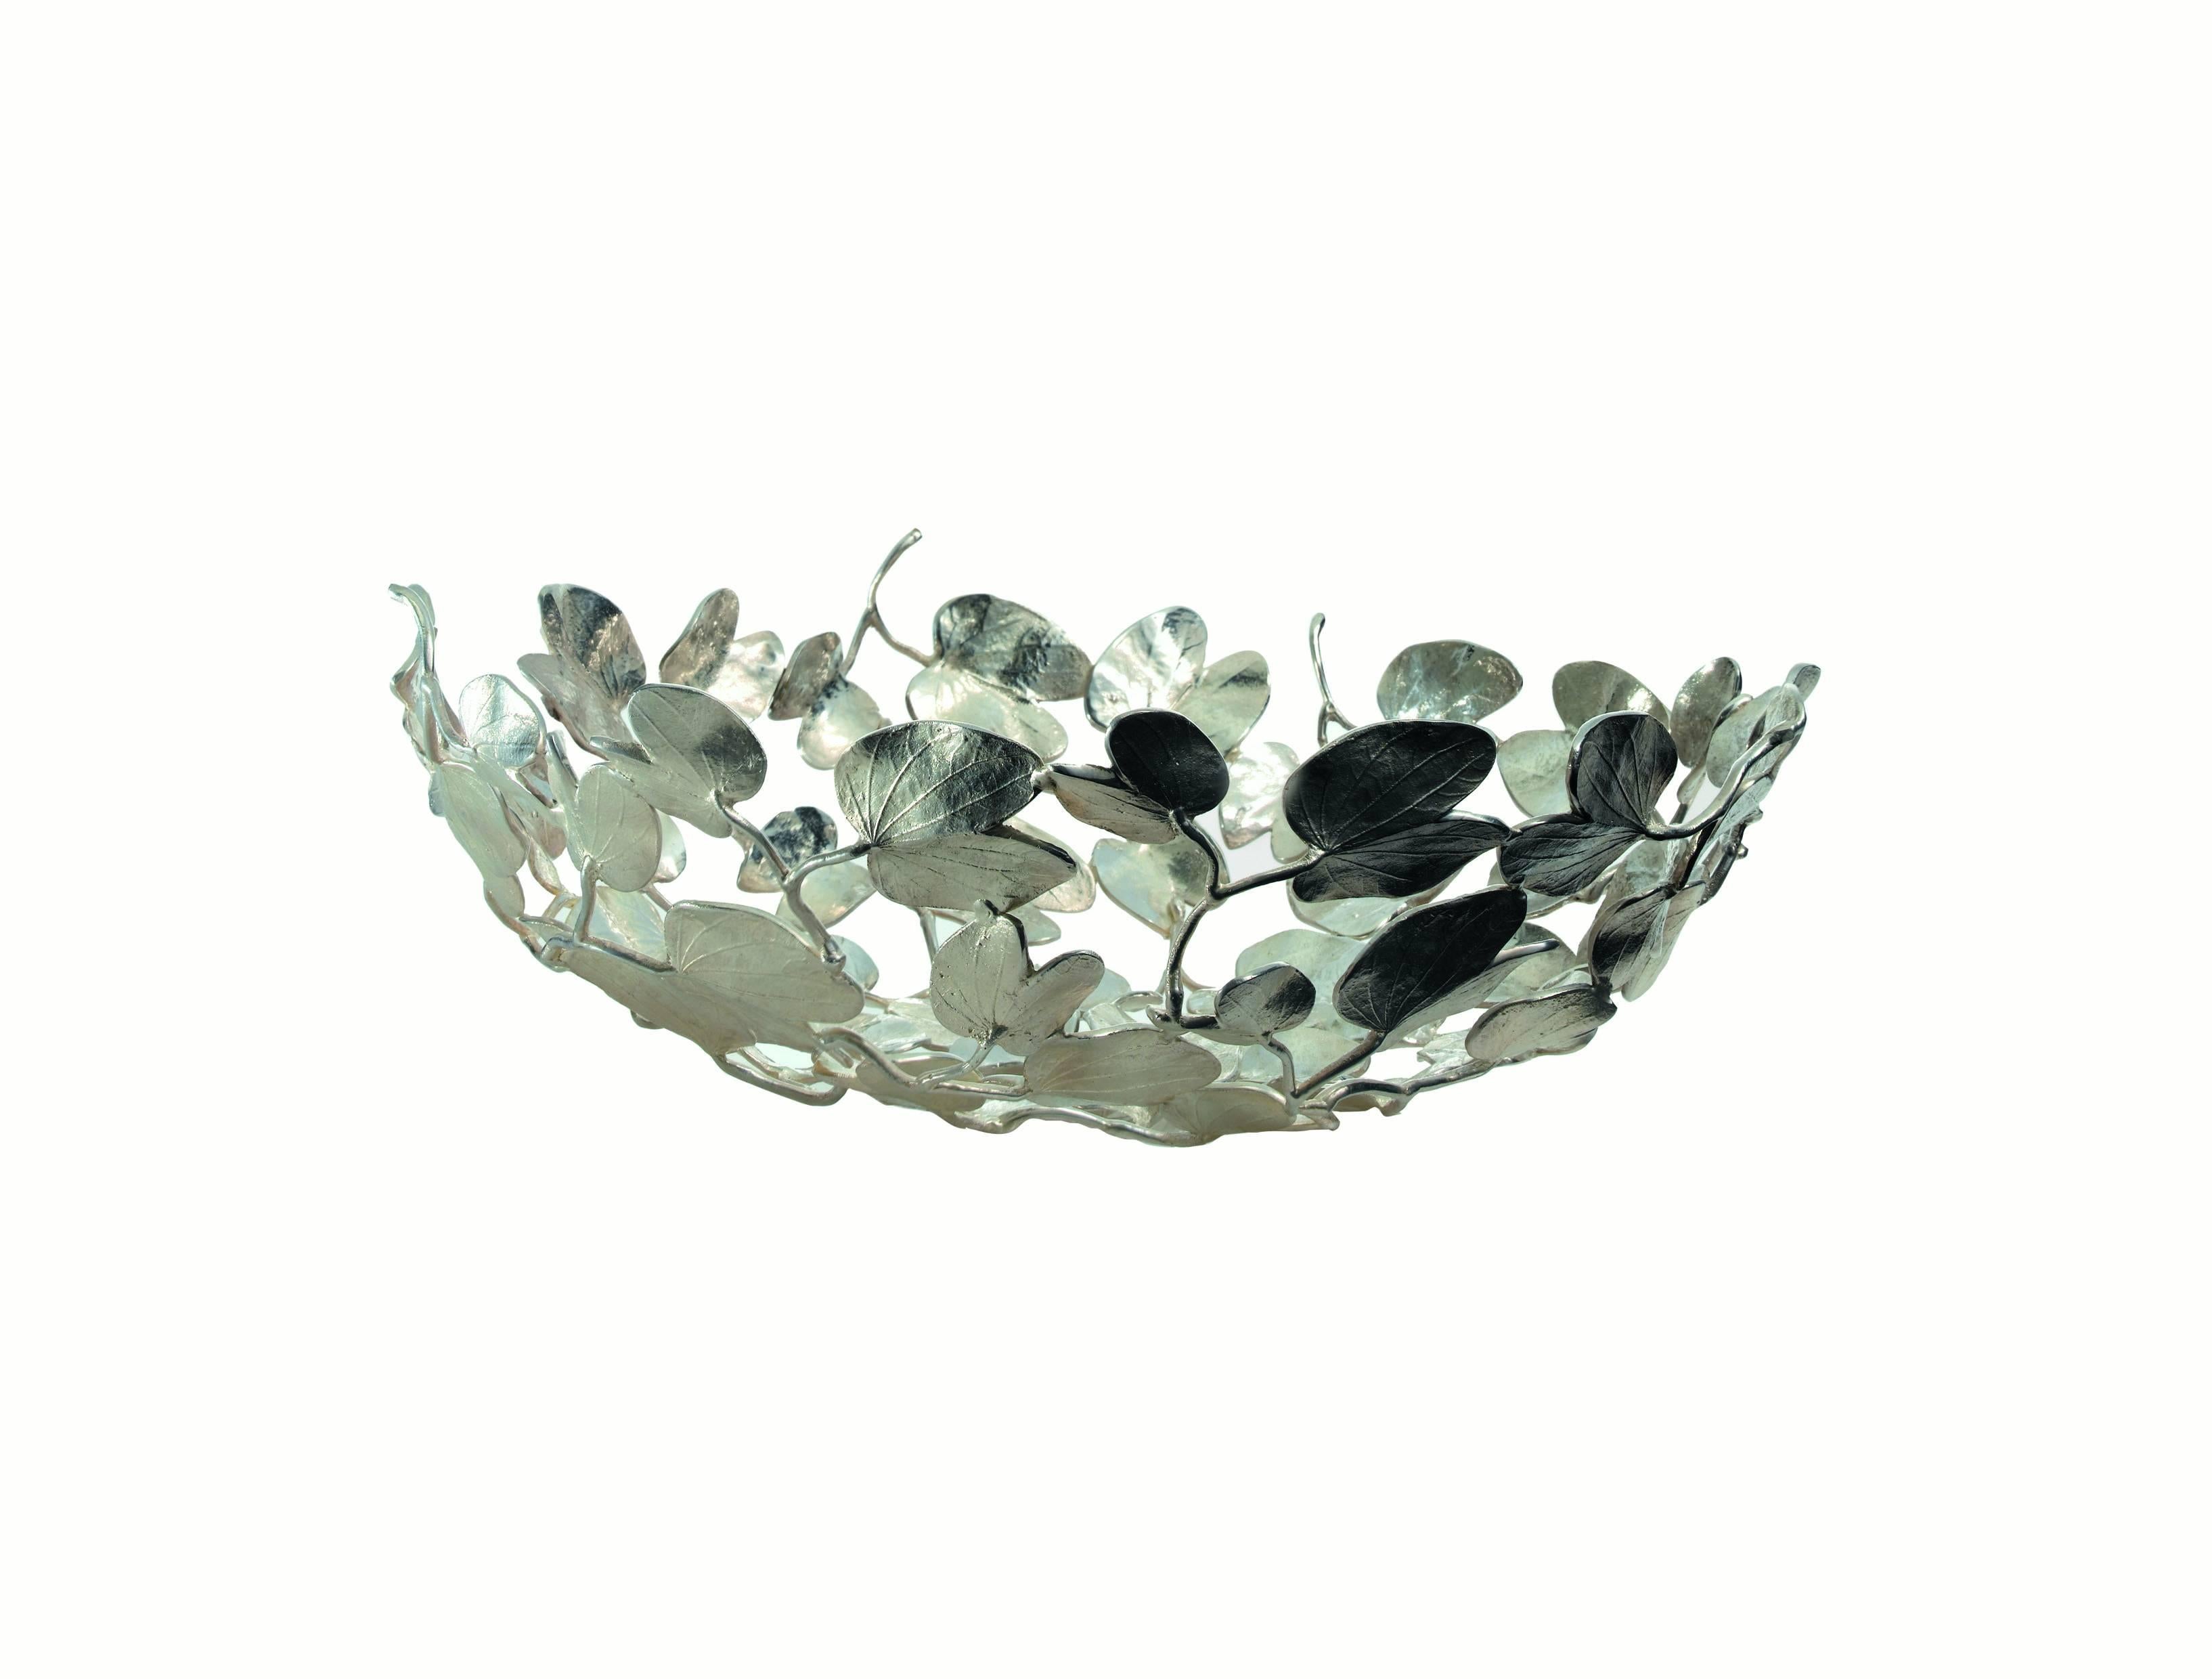 An arrangement of flowers or leaves tied together with a collection of small branches. These are the precious, bowl-shaped, centerpieces created by Mann Singh in silver-plated brass.

Mann Singh comes from far away, from the land of the Sikhs in